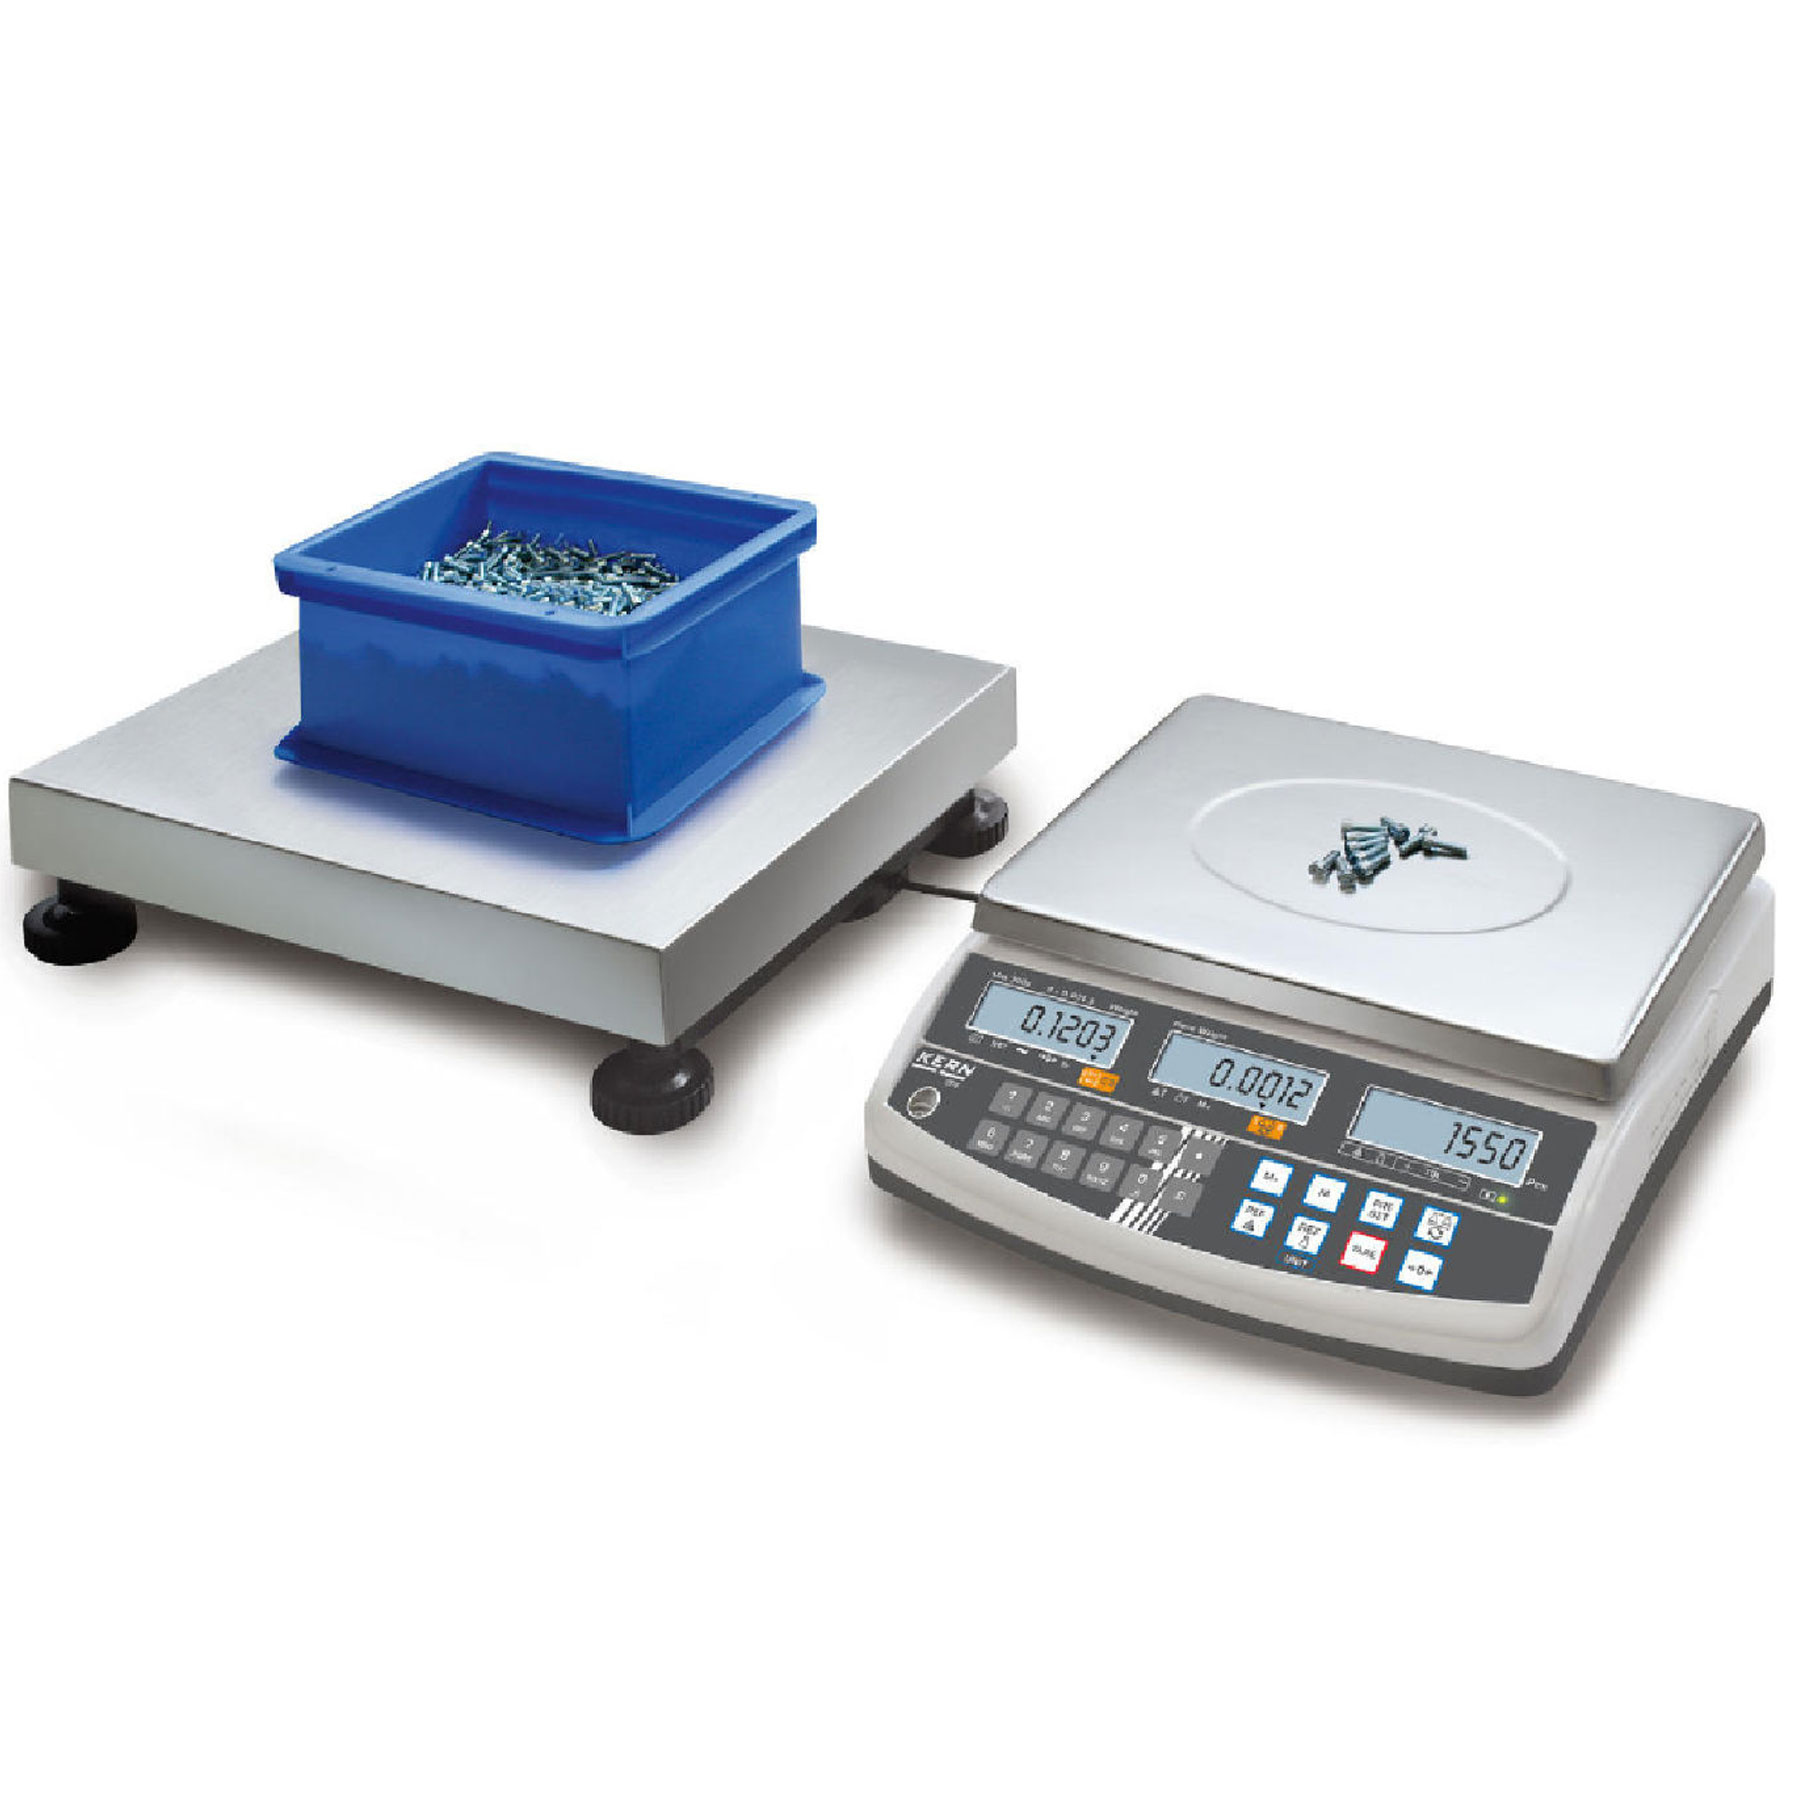 CFS Series Professional Counting Scale with PLU 